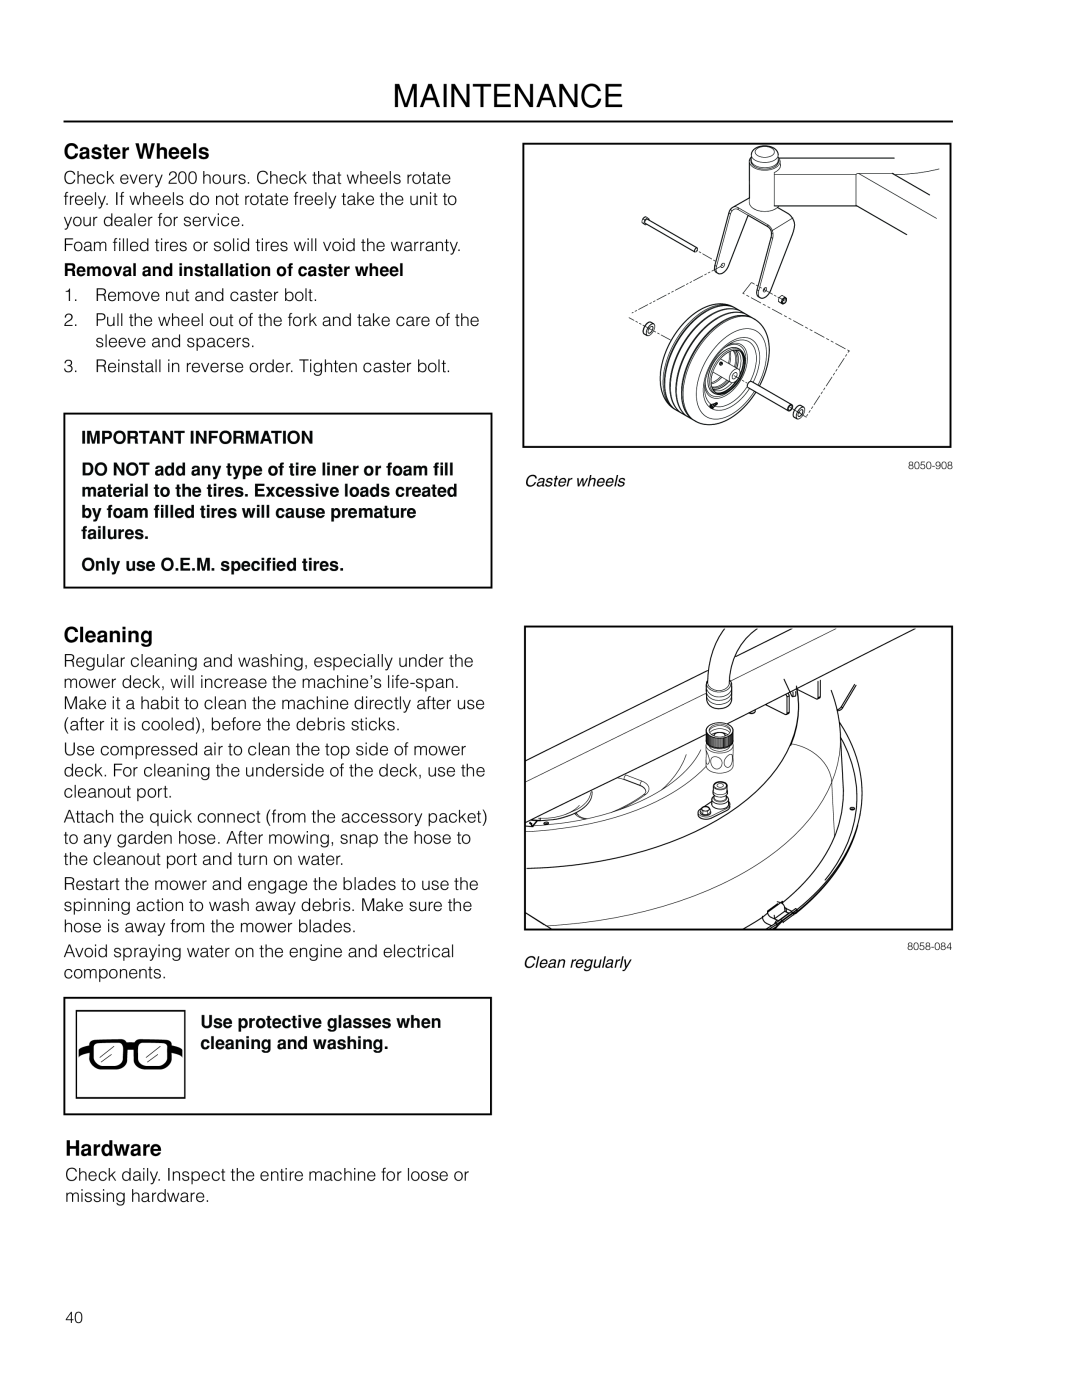 Husqvarna RZ19 CE / 966658901 Caster Wheels, Cleaning, Hardware, Removal and installation of caster wheel, Maintenance 